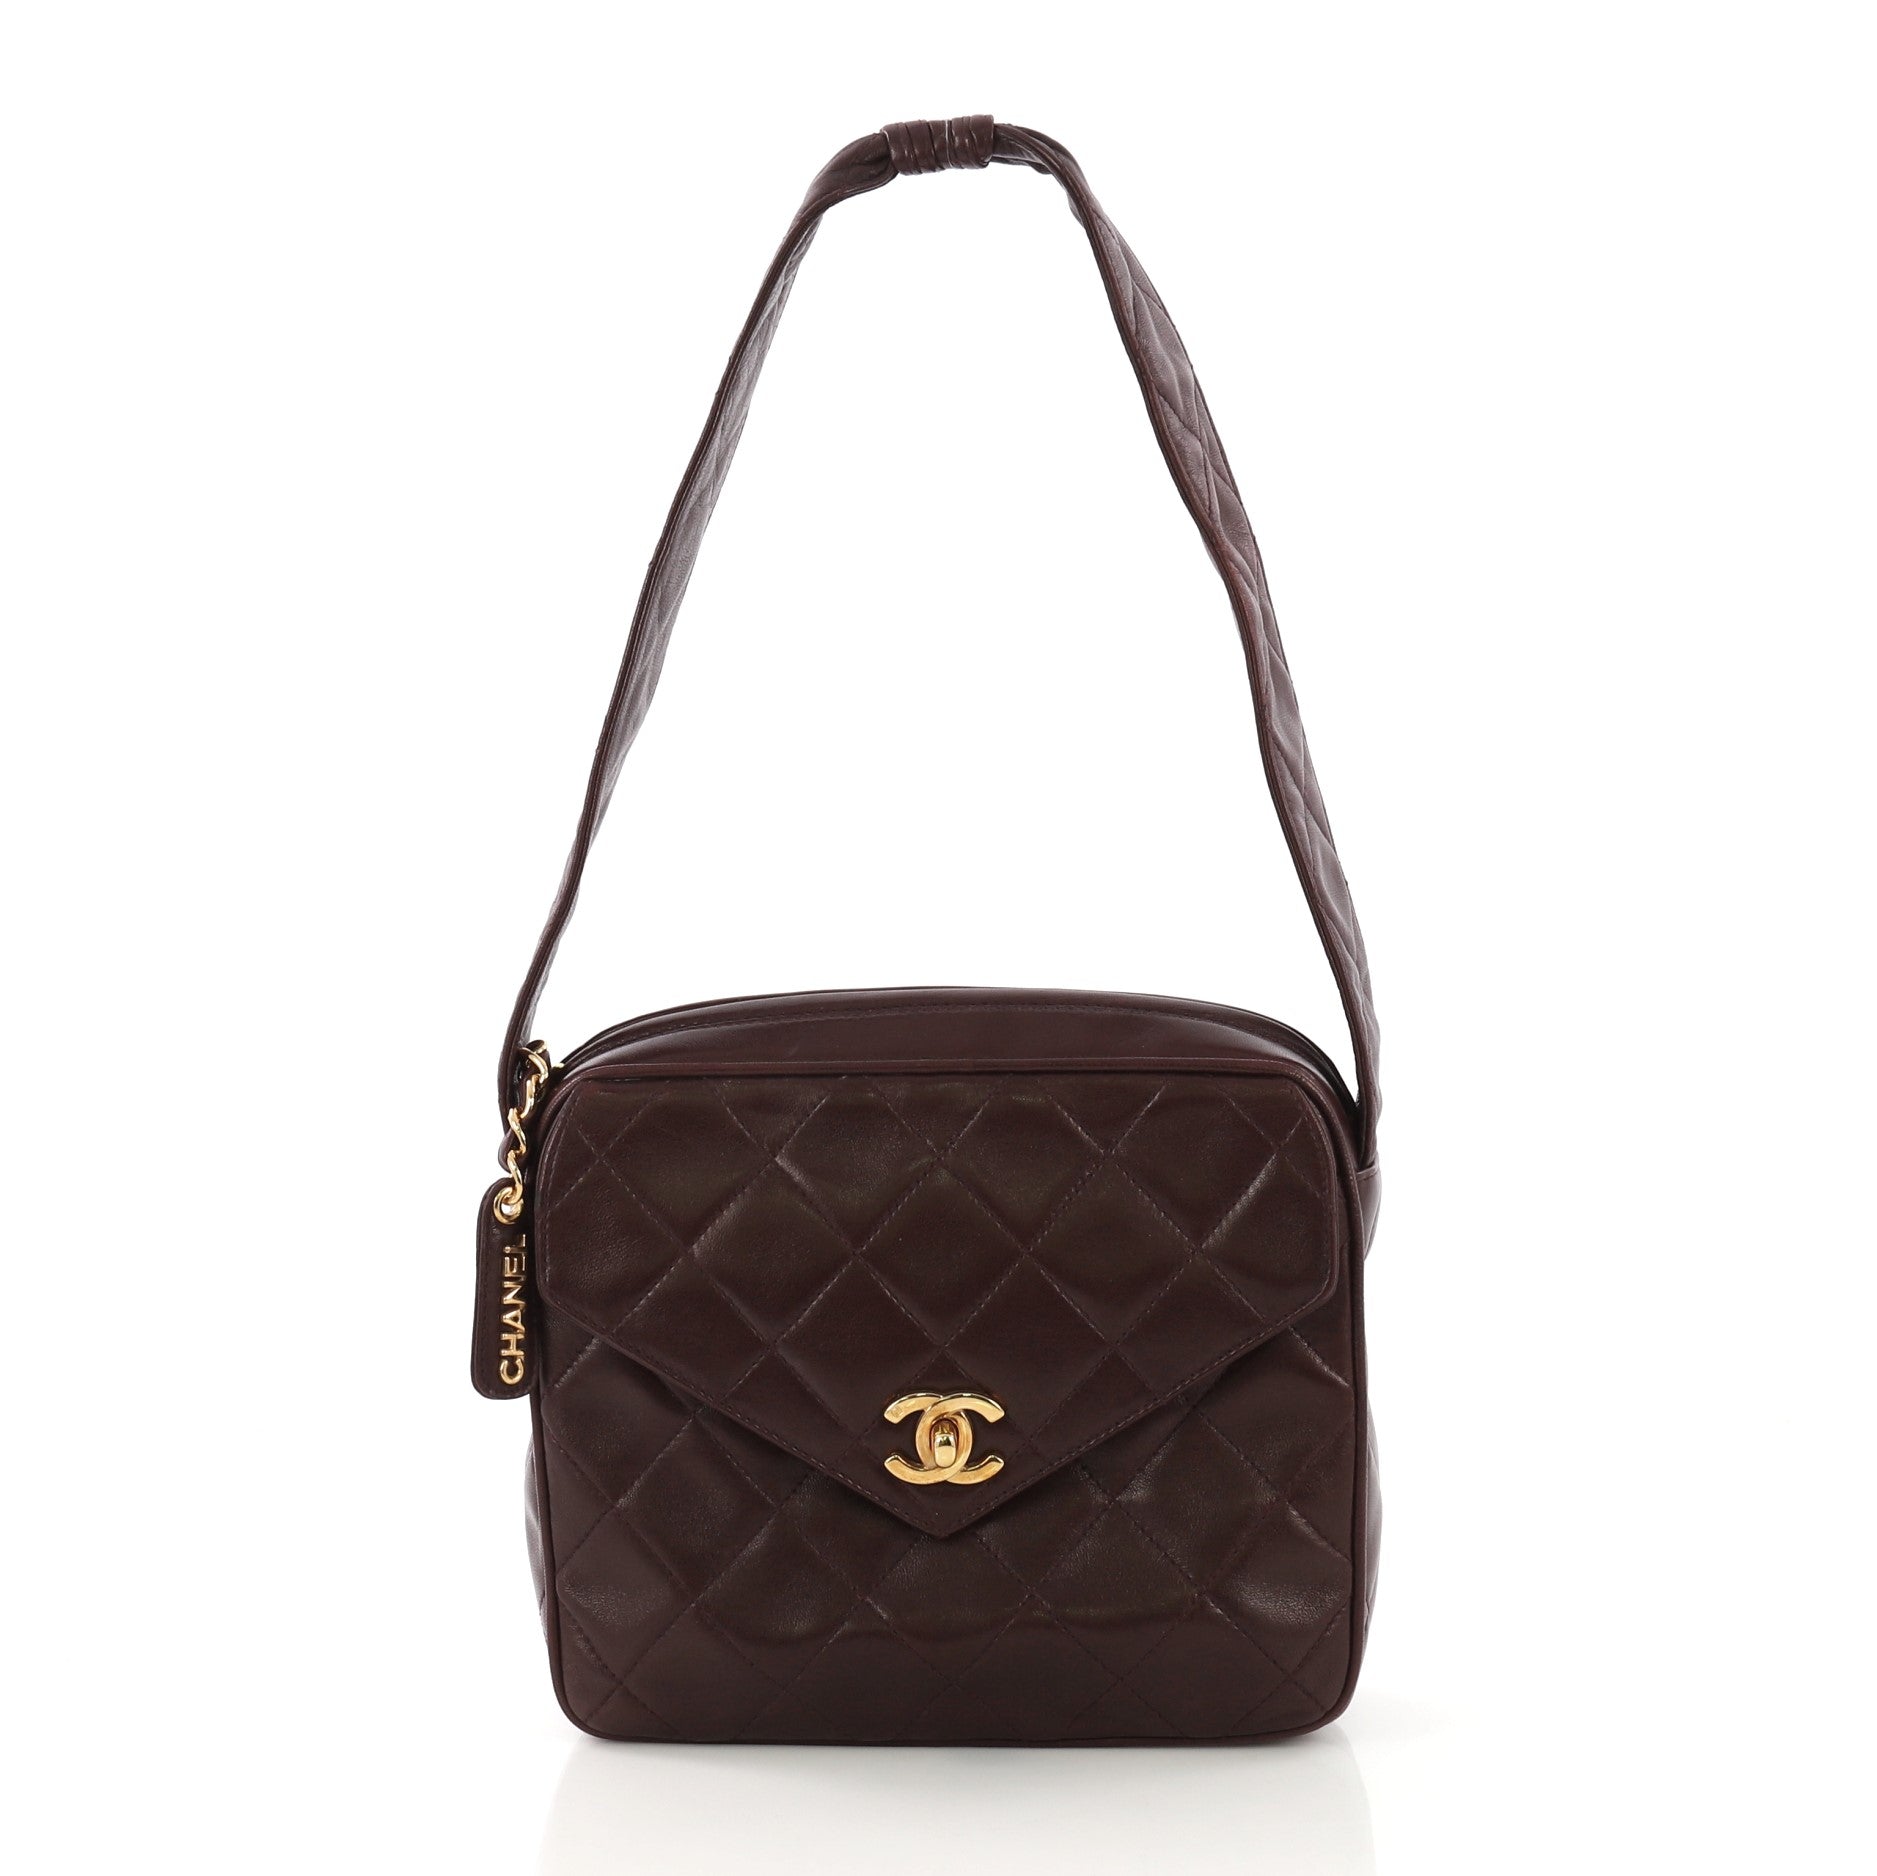 Chanel Square Classic Single Flap Bag Quilted Caviar Mini Black